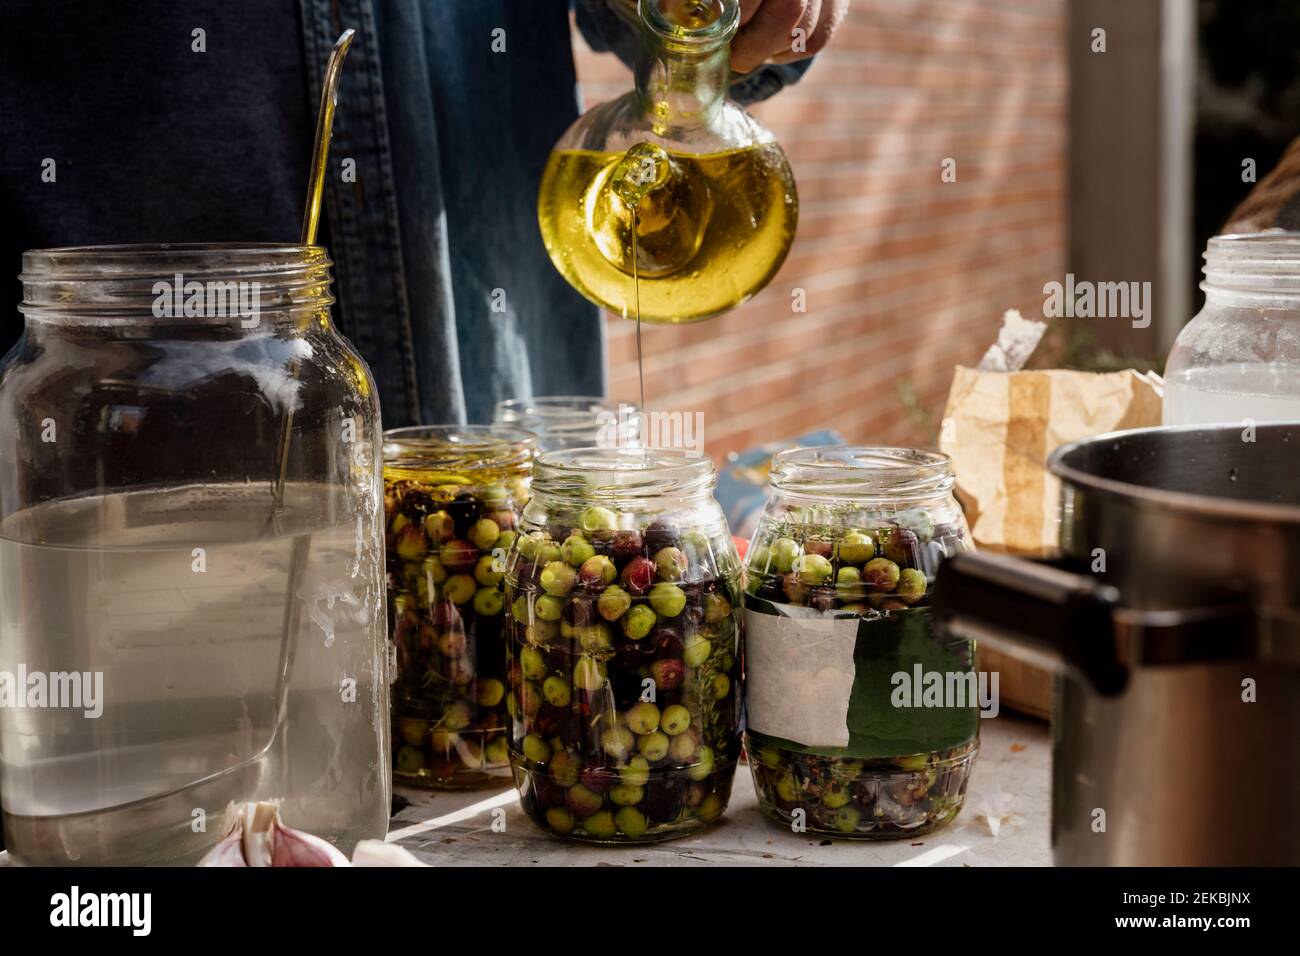 Senior man pouring olive oil in glass jar on table Stock Photo